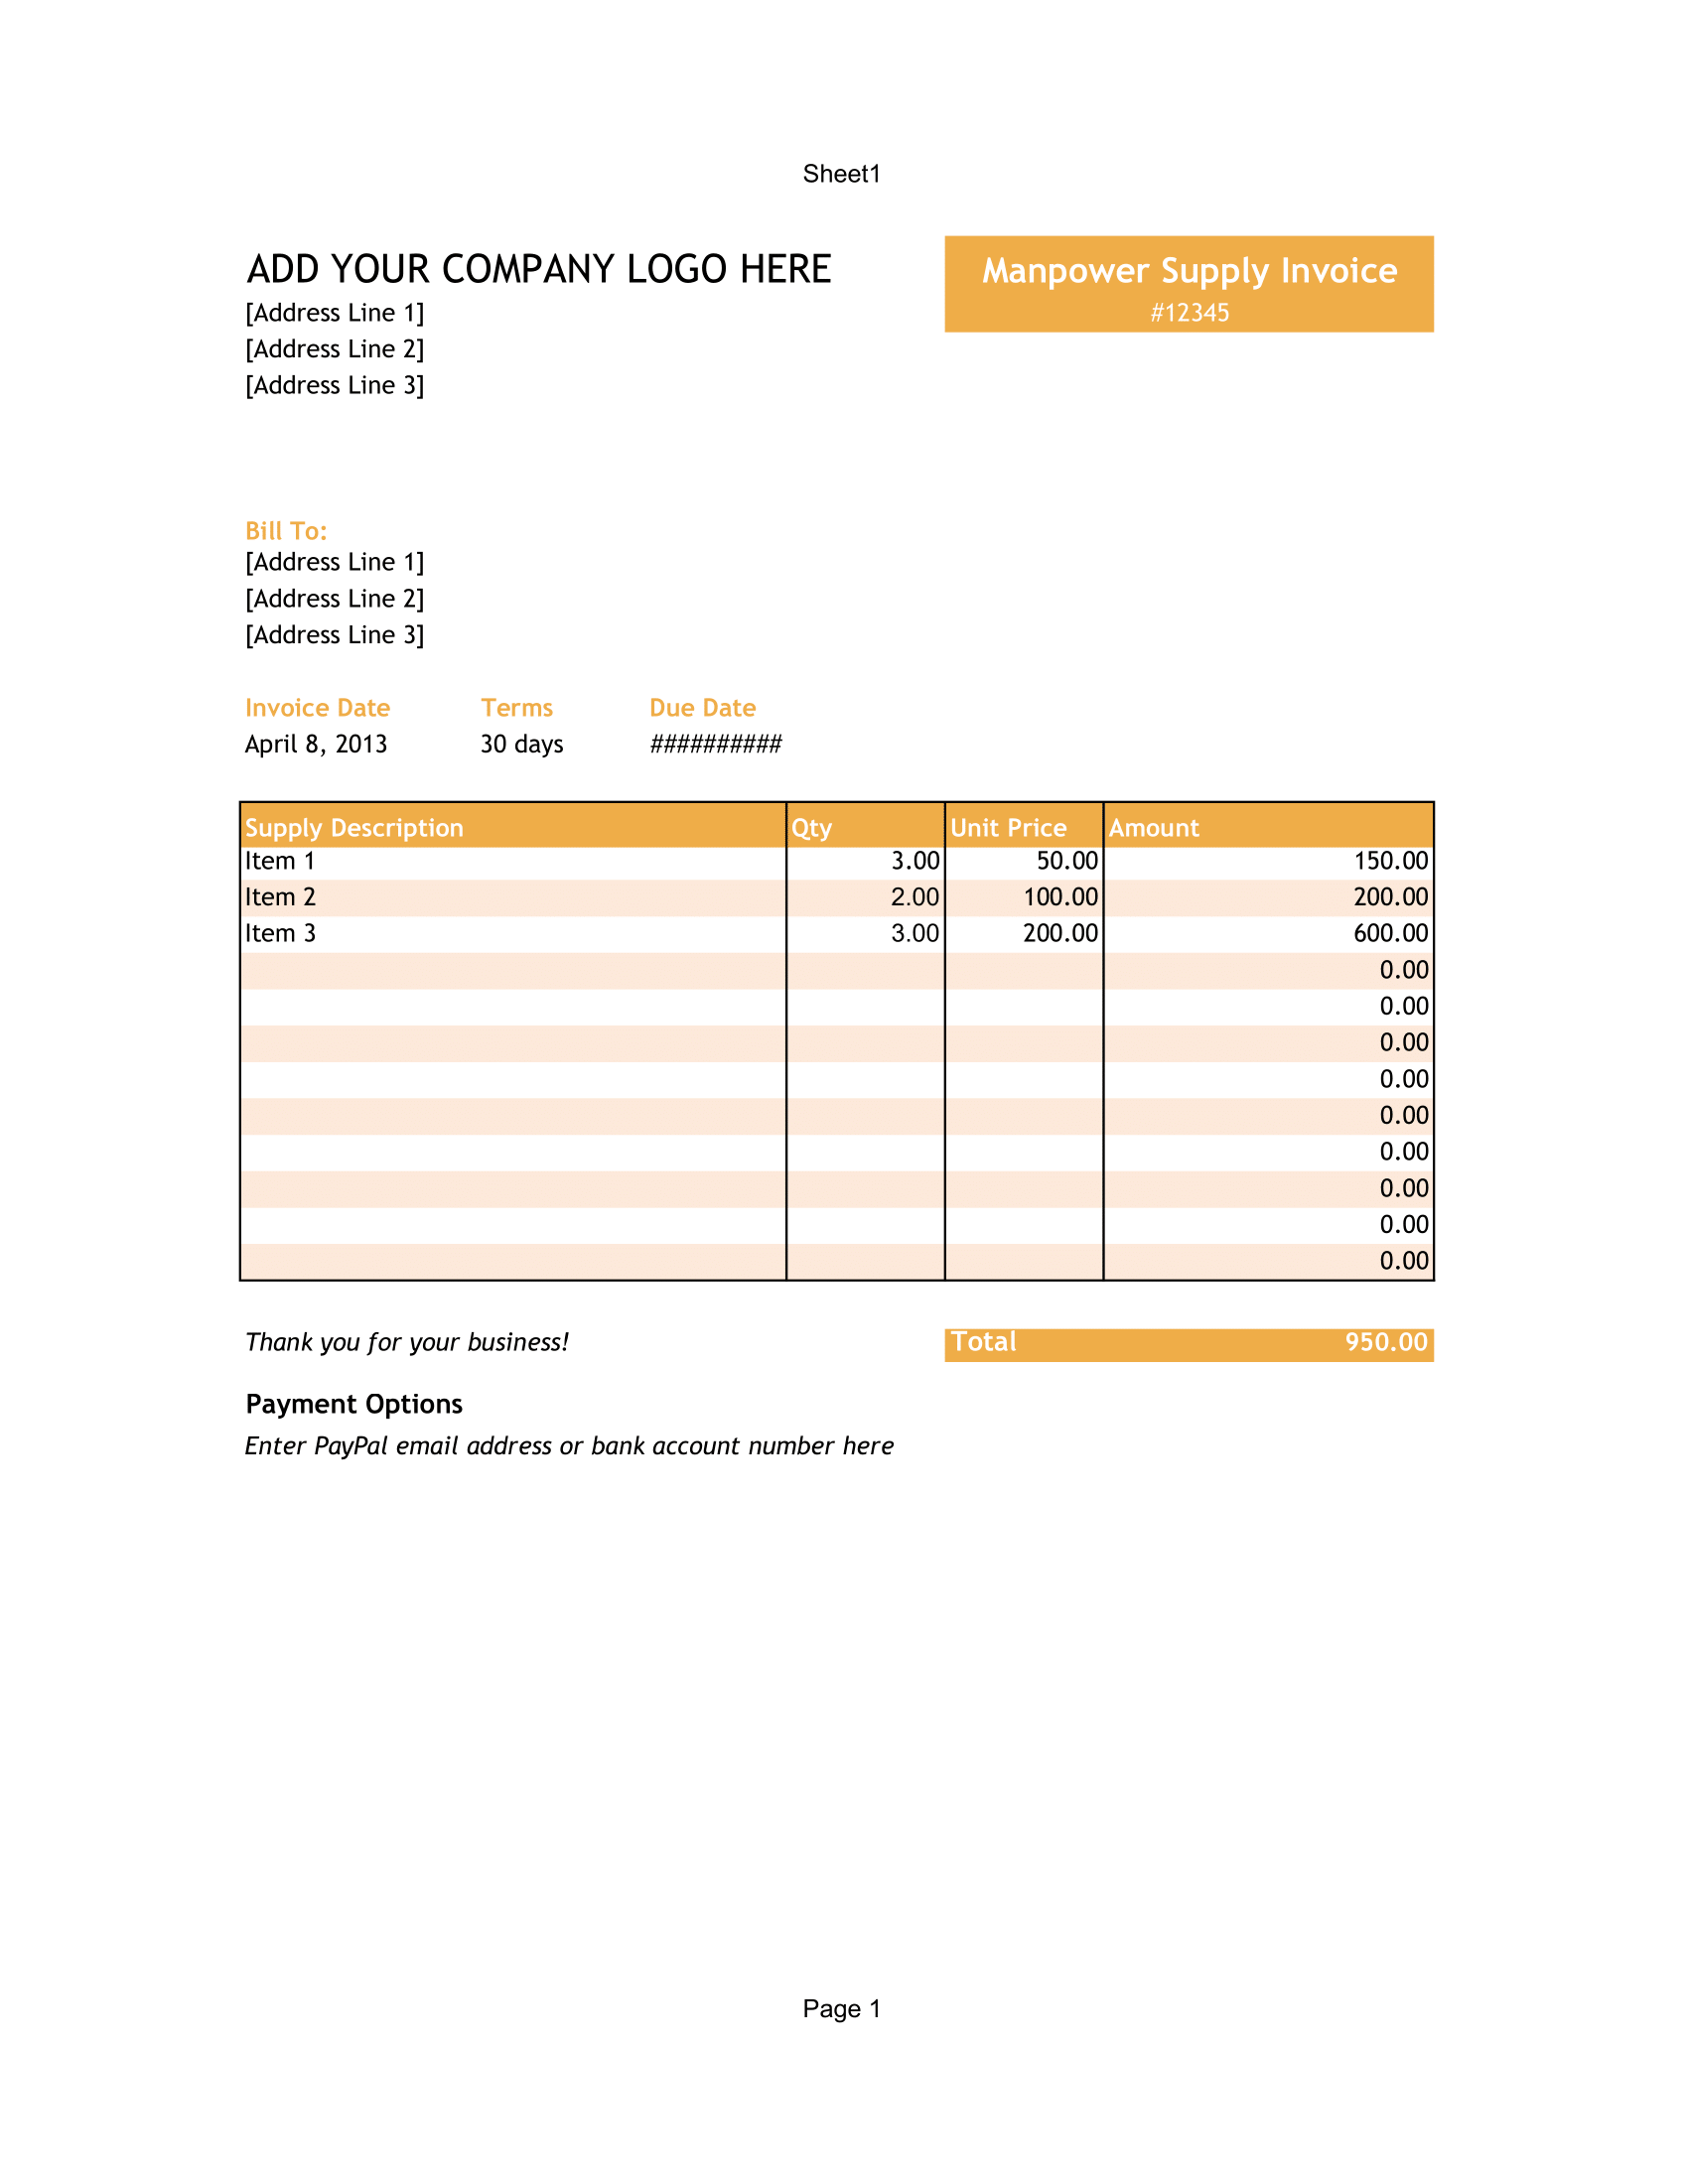 Manpower Supply Invoice Format in Excel and Spreadsheet